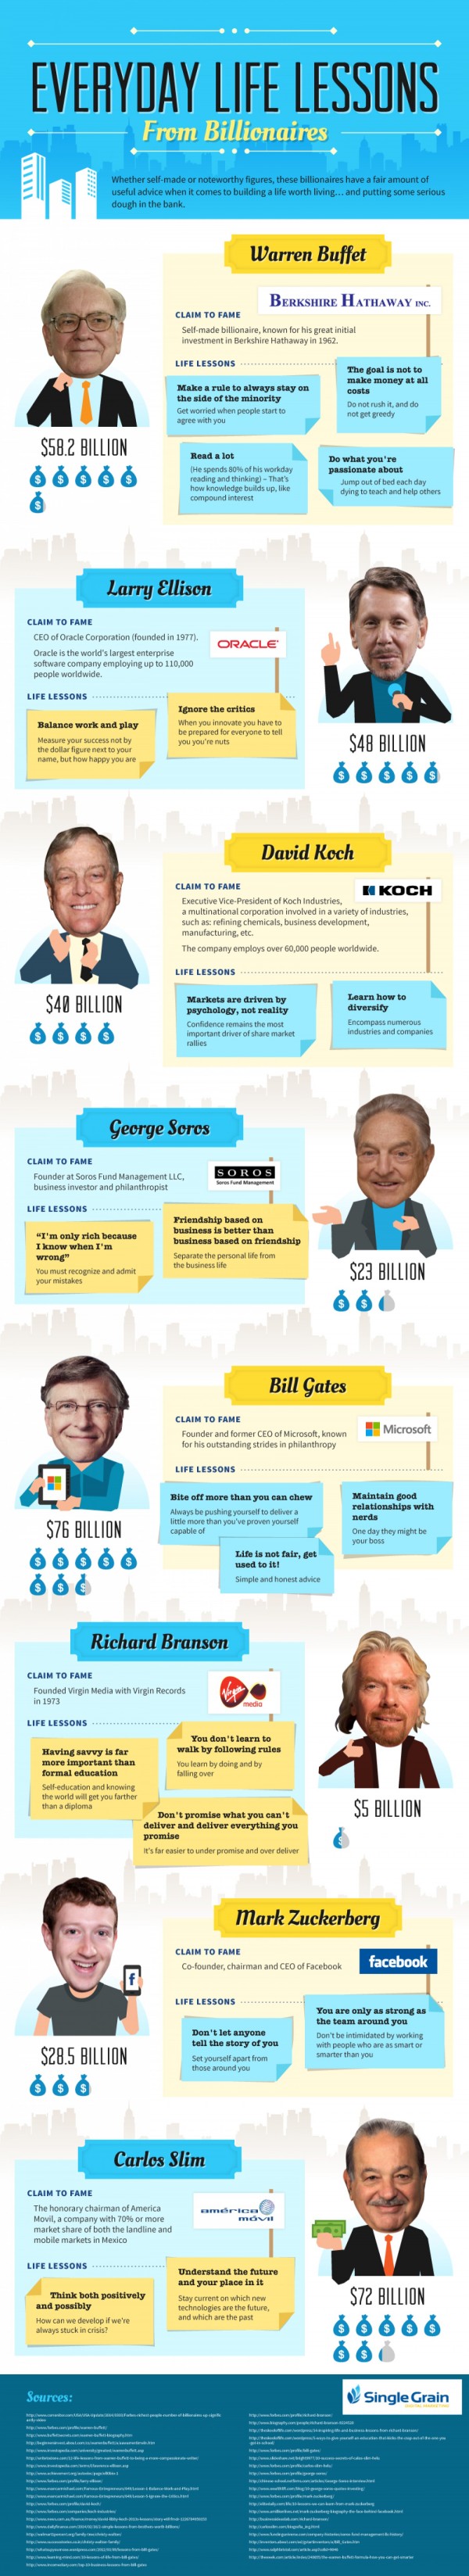 life lessons from billionaires